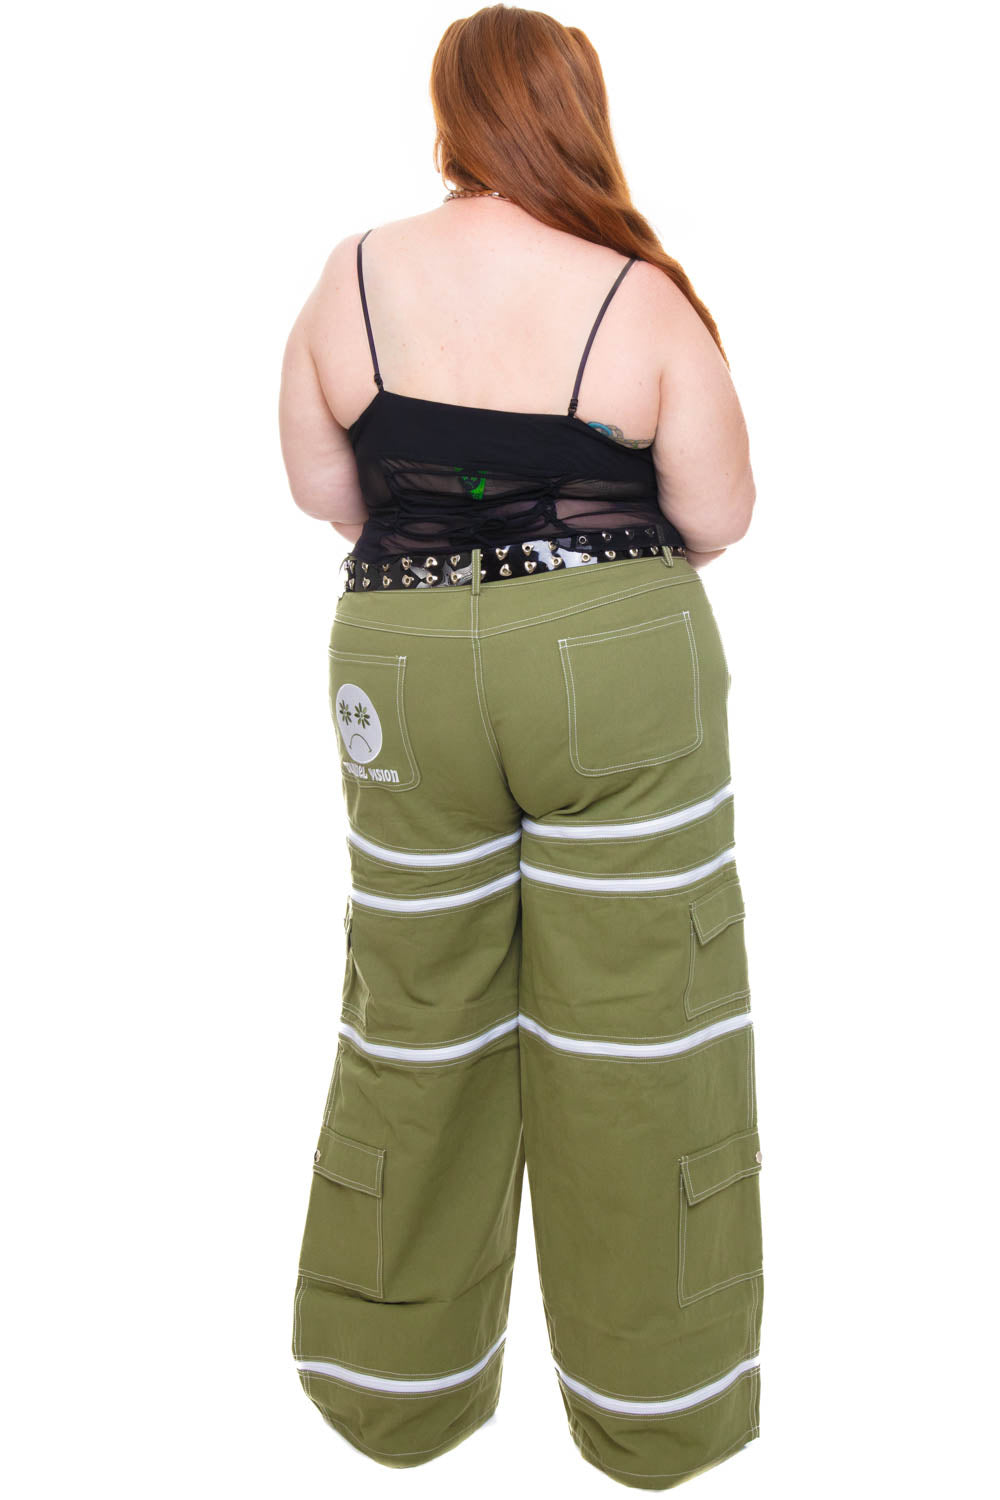 Olive Tunnel Zip-Off Convertible – Cargo Vision 5-in-1 Green Pants